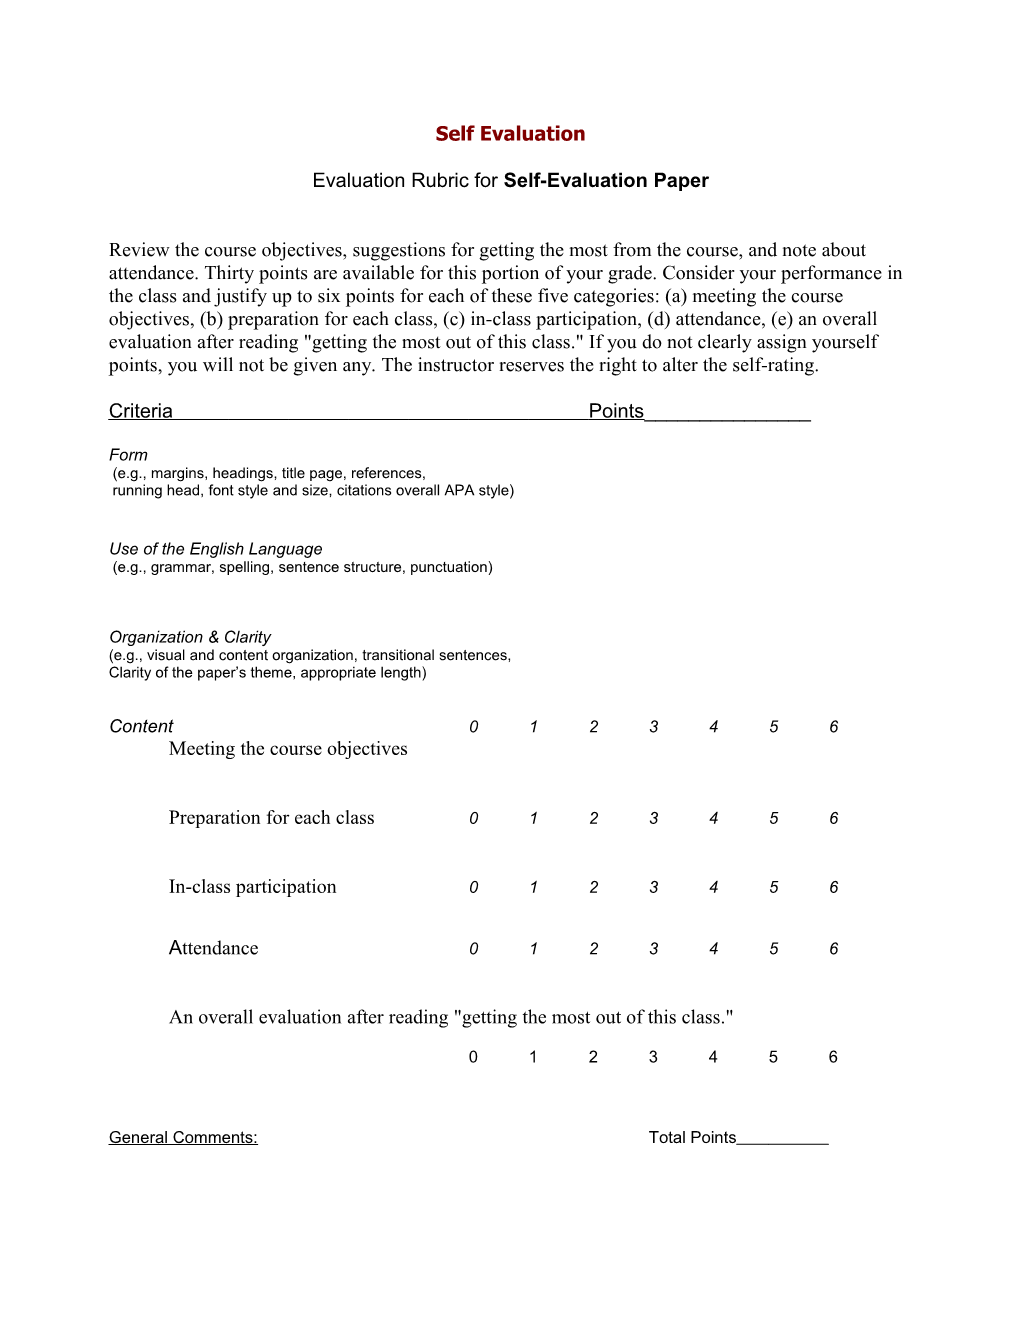 Evaluation Rubric for Self-Evaluation Paper